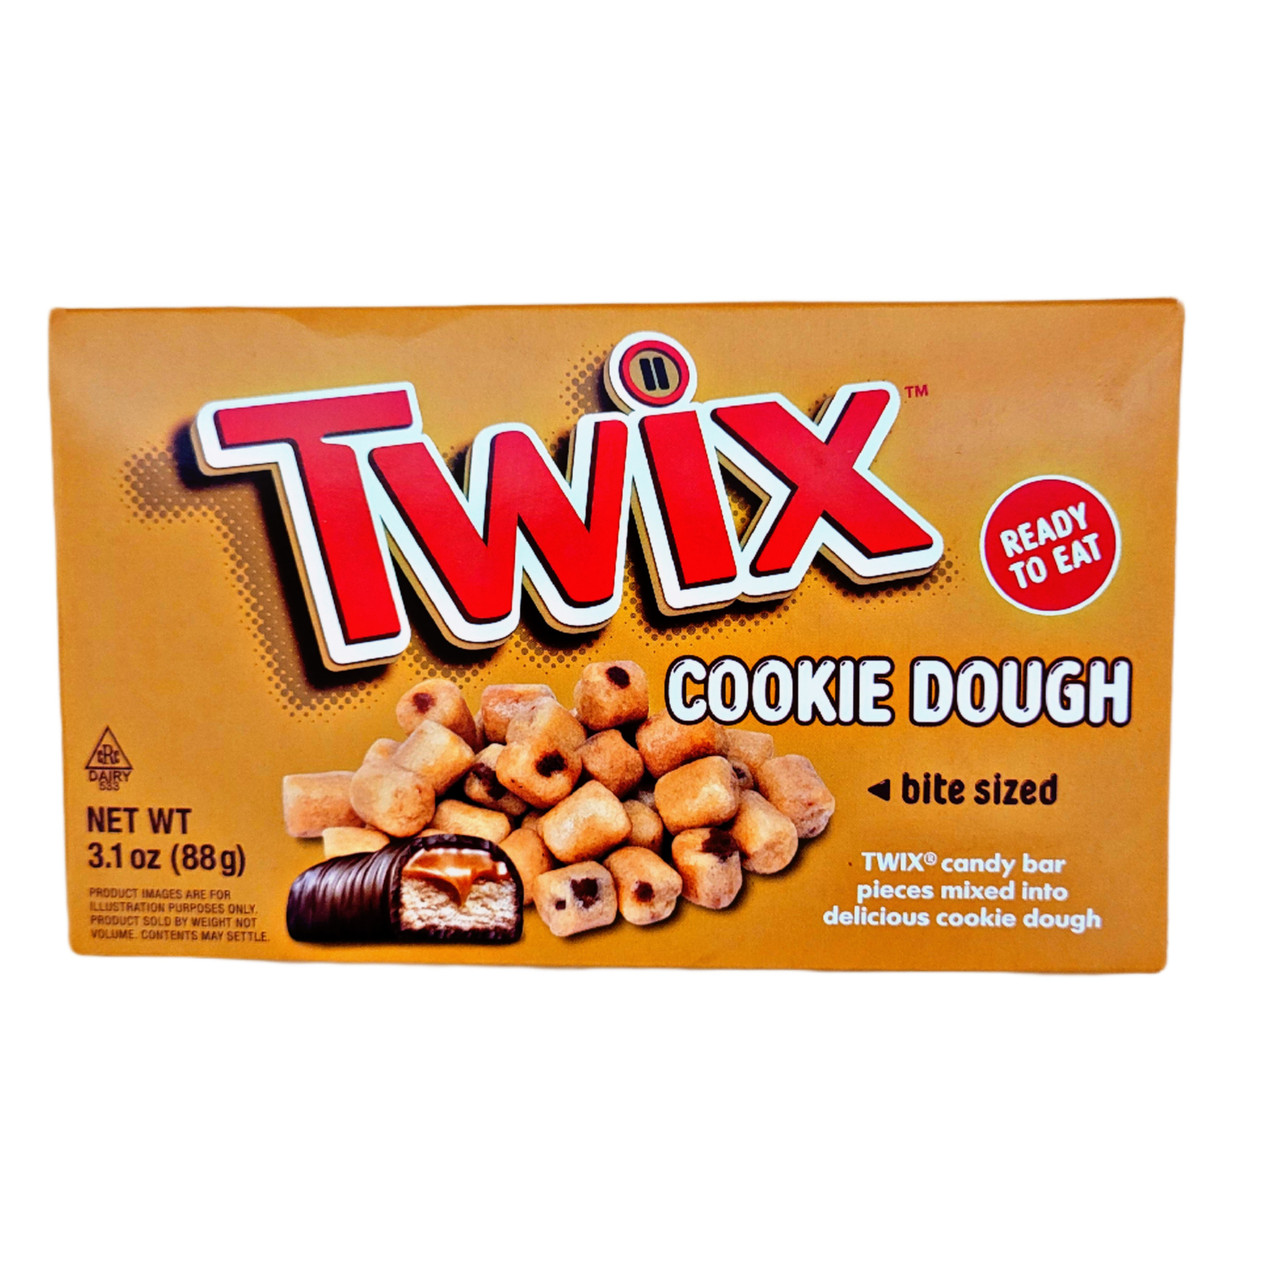 Bite Size Cookie Dough in Creamy Milk Chocolate in a Theater Box by Taste  of Nature